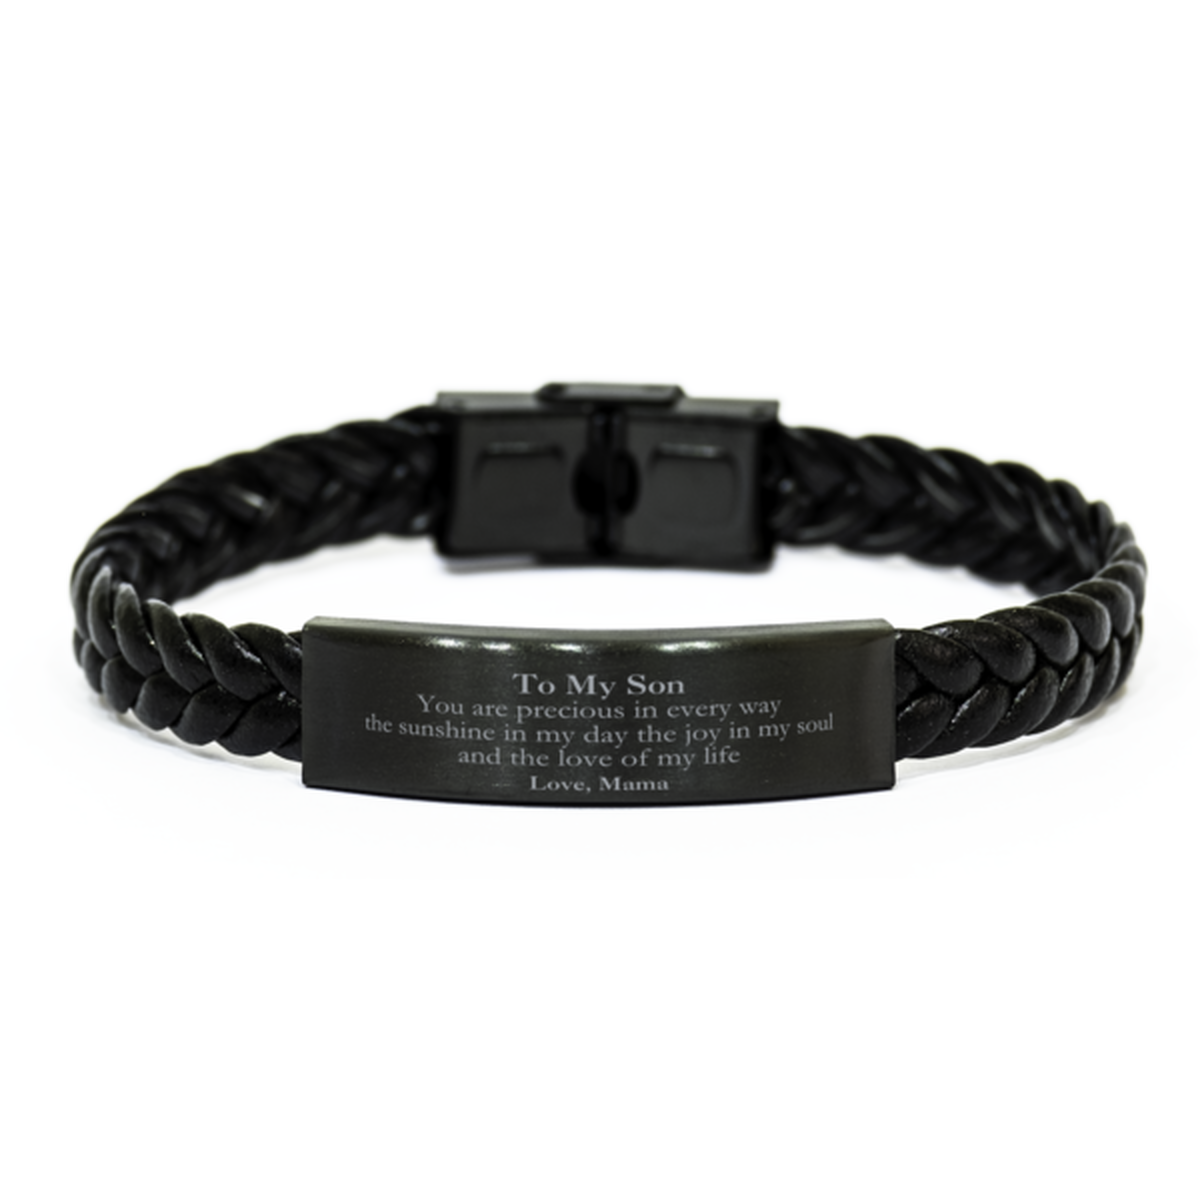 Graduation Gifts for Son Braided Leather Bracelet Present from Mama, Christmas Son Birthday Gifts Son You are precious in every way the sunshine in my day. Love, Mama